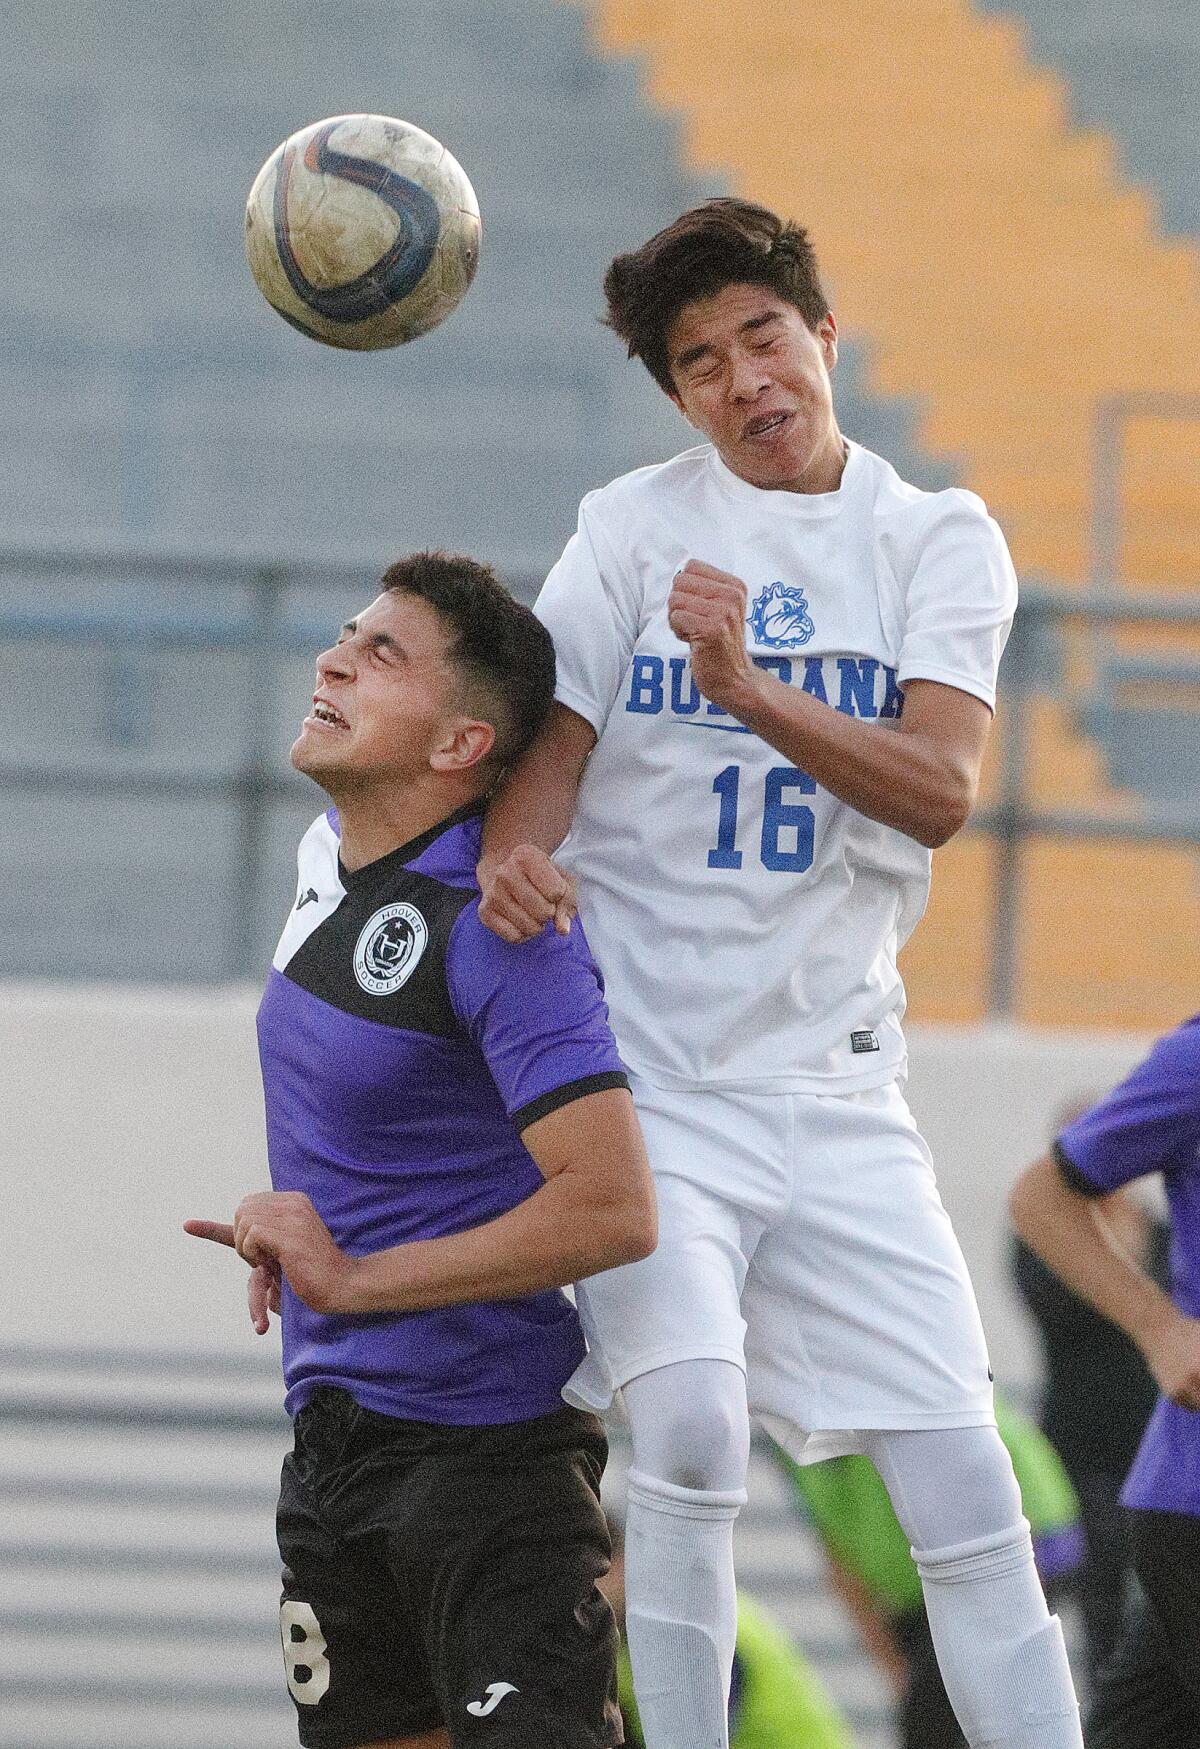 Burbank’s Freddy Cardenas, right, heads the ball over Hoover’s Sevak Papazyan in a Pacific League boys' soccer game at Hoover High School on Friday, January 3, 2020.